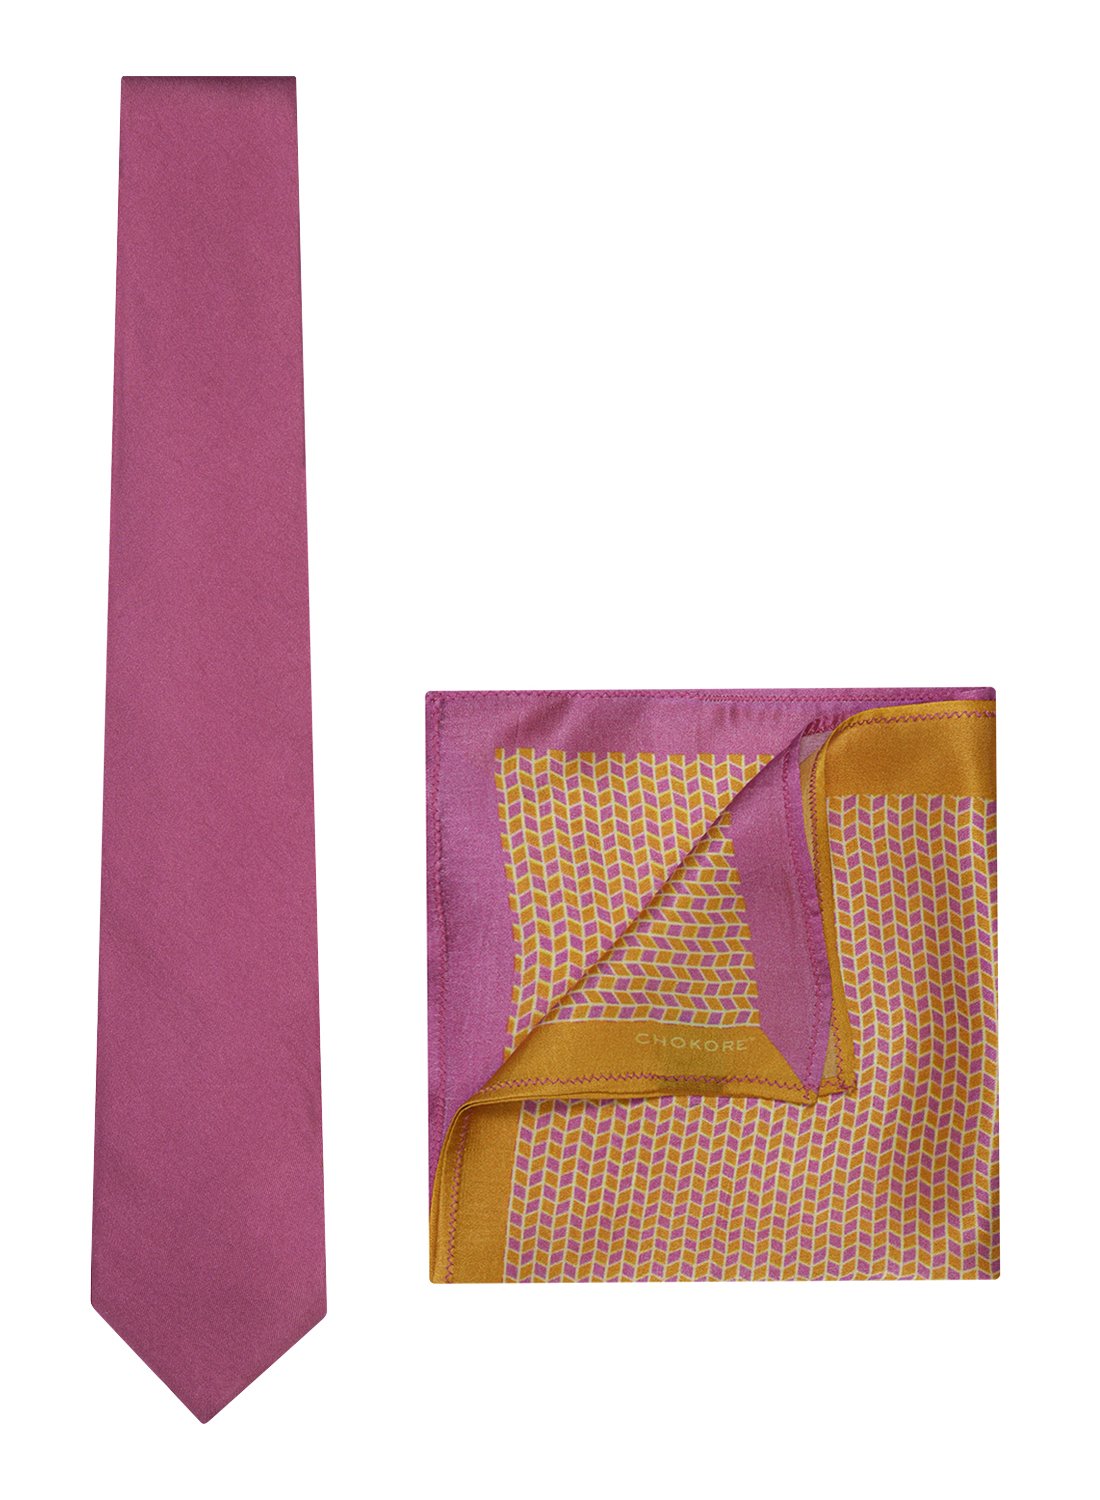 Chokore Pink color silk tie & Two-in-one Gold & Purple Pure Silk Pocket Square set